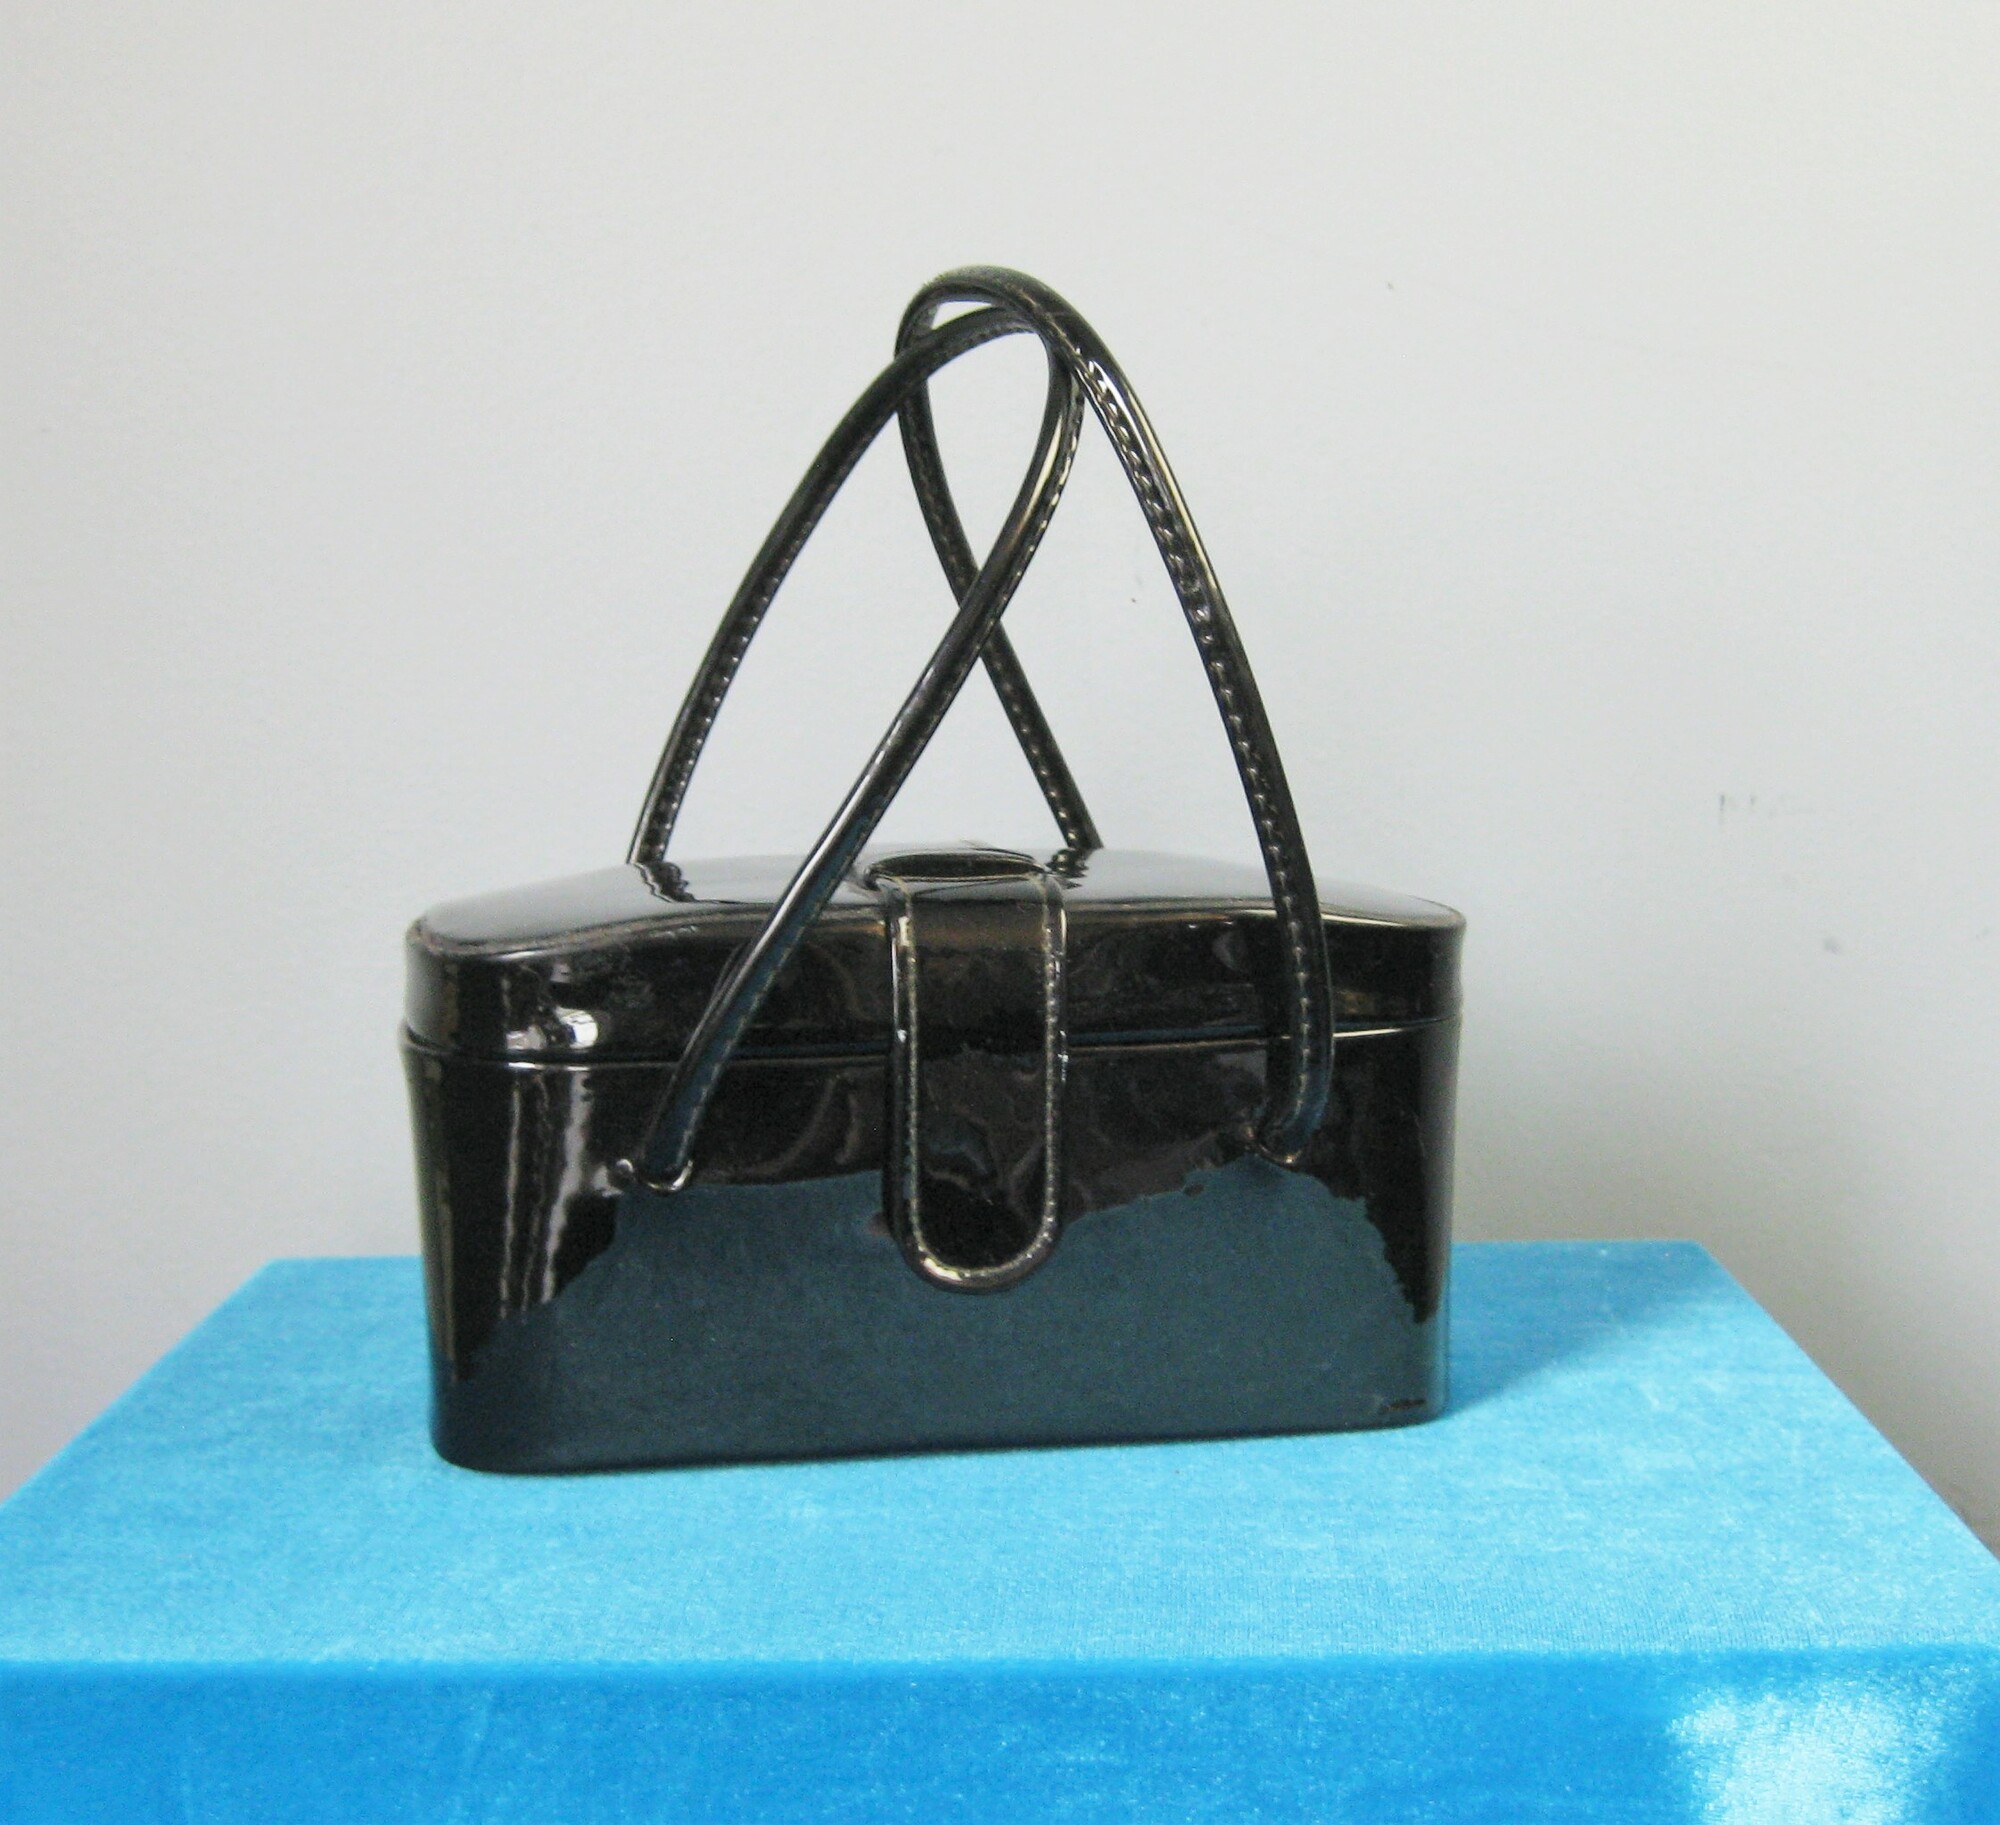 Cute little purse in black patent leather with a hinged top and a mirror inside and brass feet
Double handles
Snap closure
Width: 8
Height: 4
Handle Drop: 5.5
Depth: 4.5

Great condition with a melted  (?) round spot on the bottom and the mirror is tarnished.

thanks for looking!
#42800